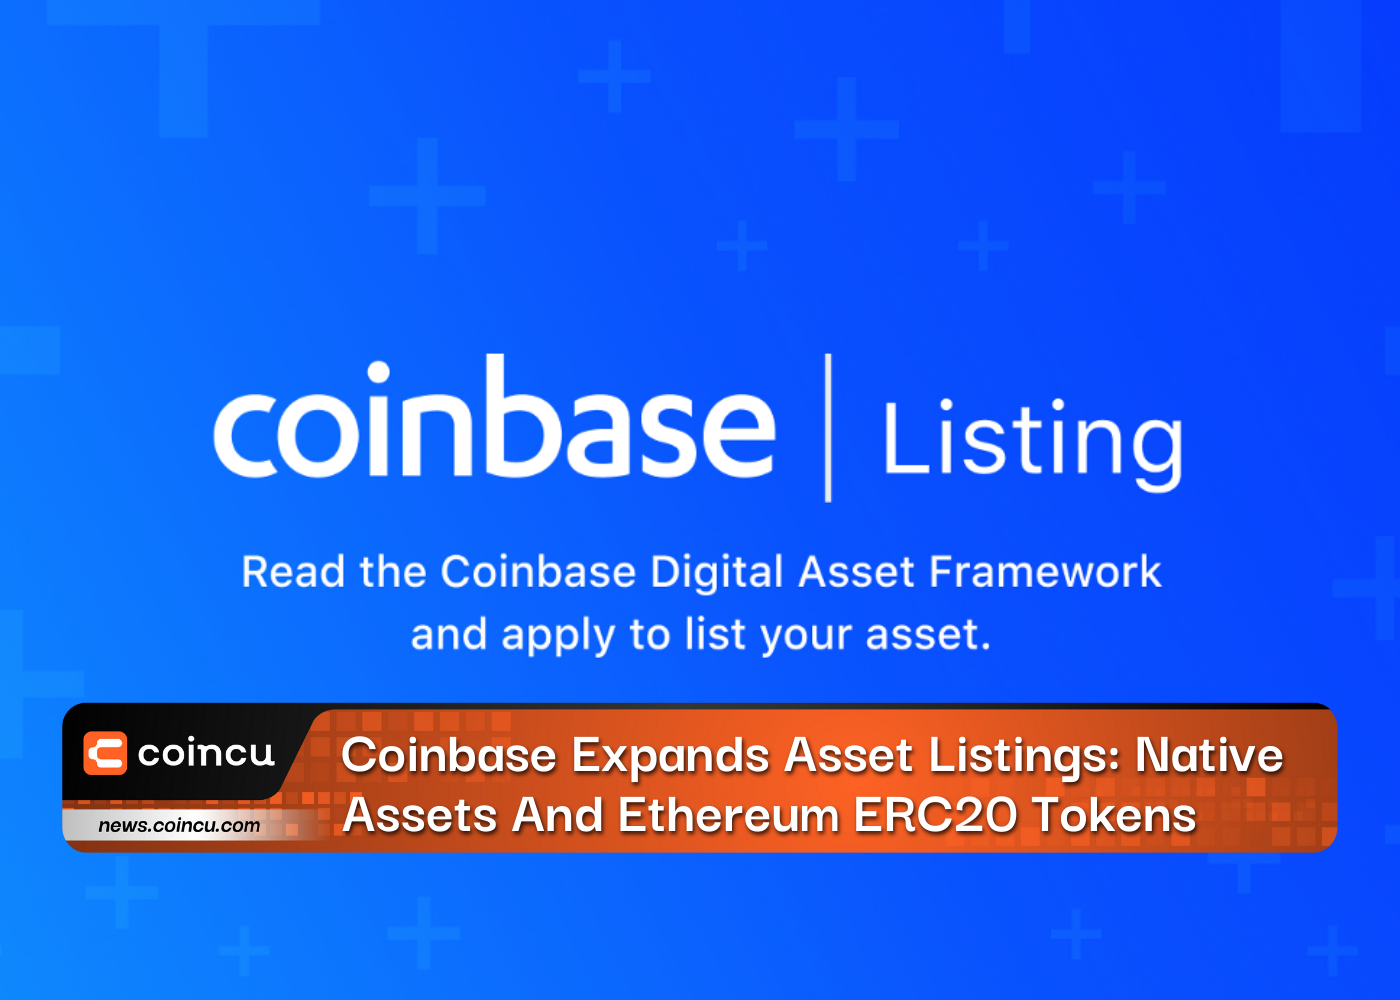 Coinbase Expands Asset Listings: Native Assets And Ethereum ERC20 Tokens